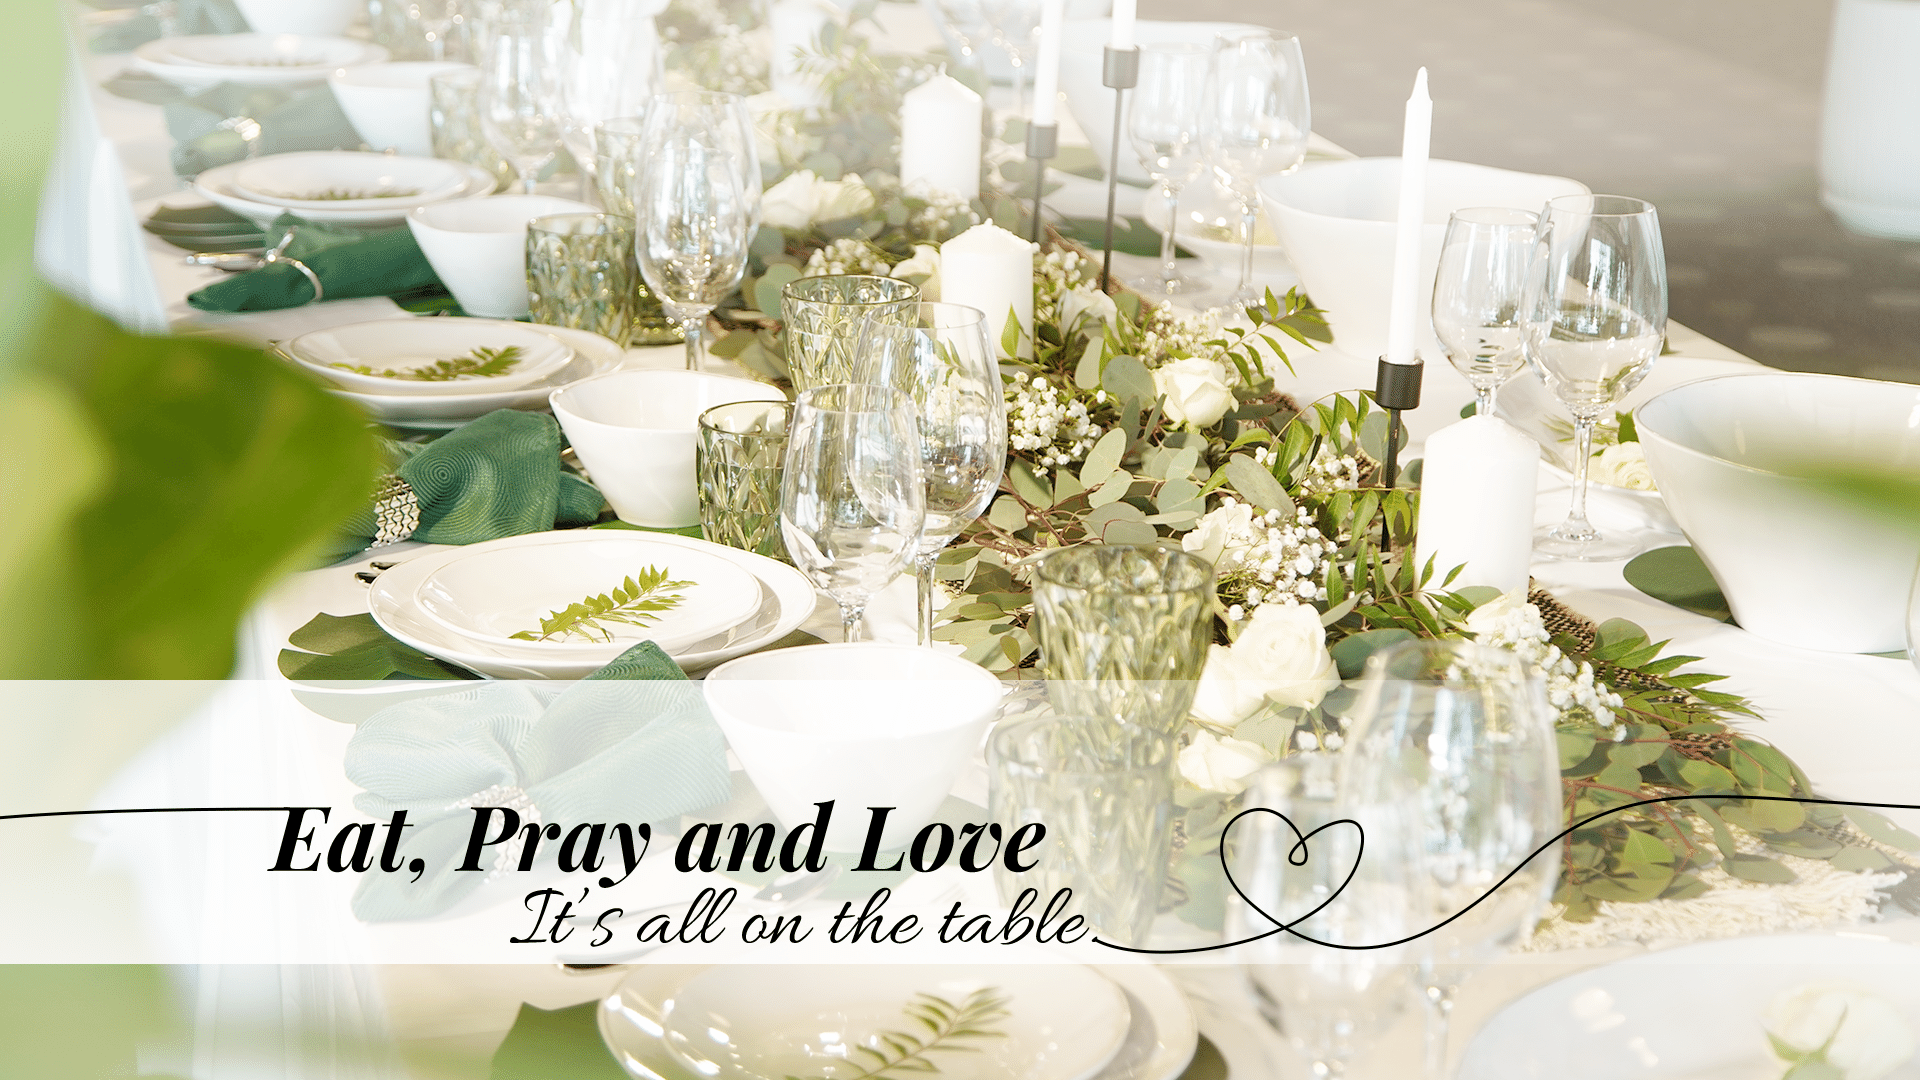 Eat, Pray and Love It’s all on the table.